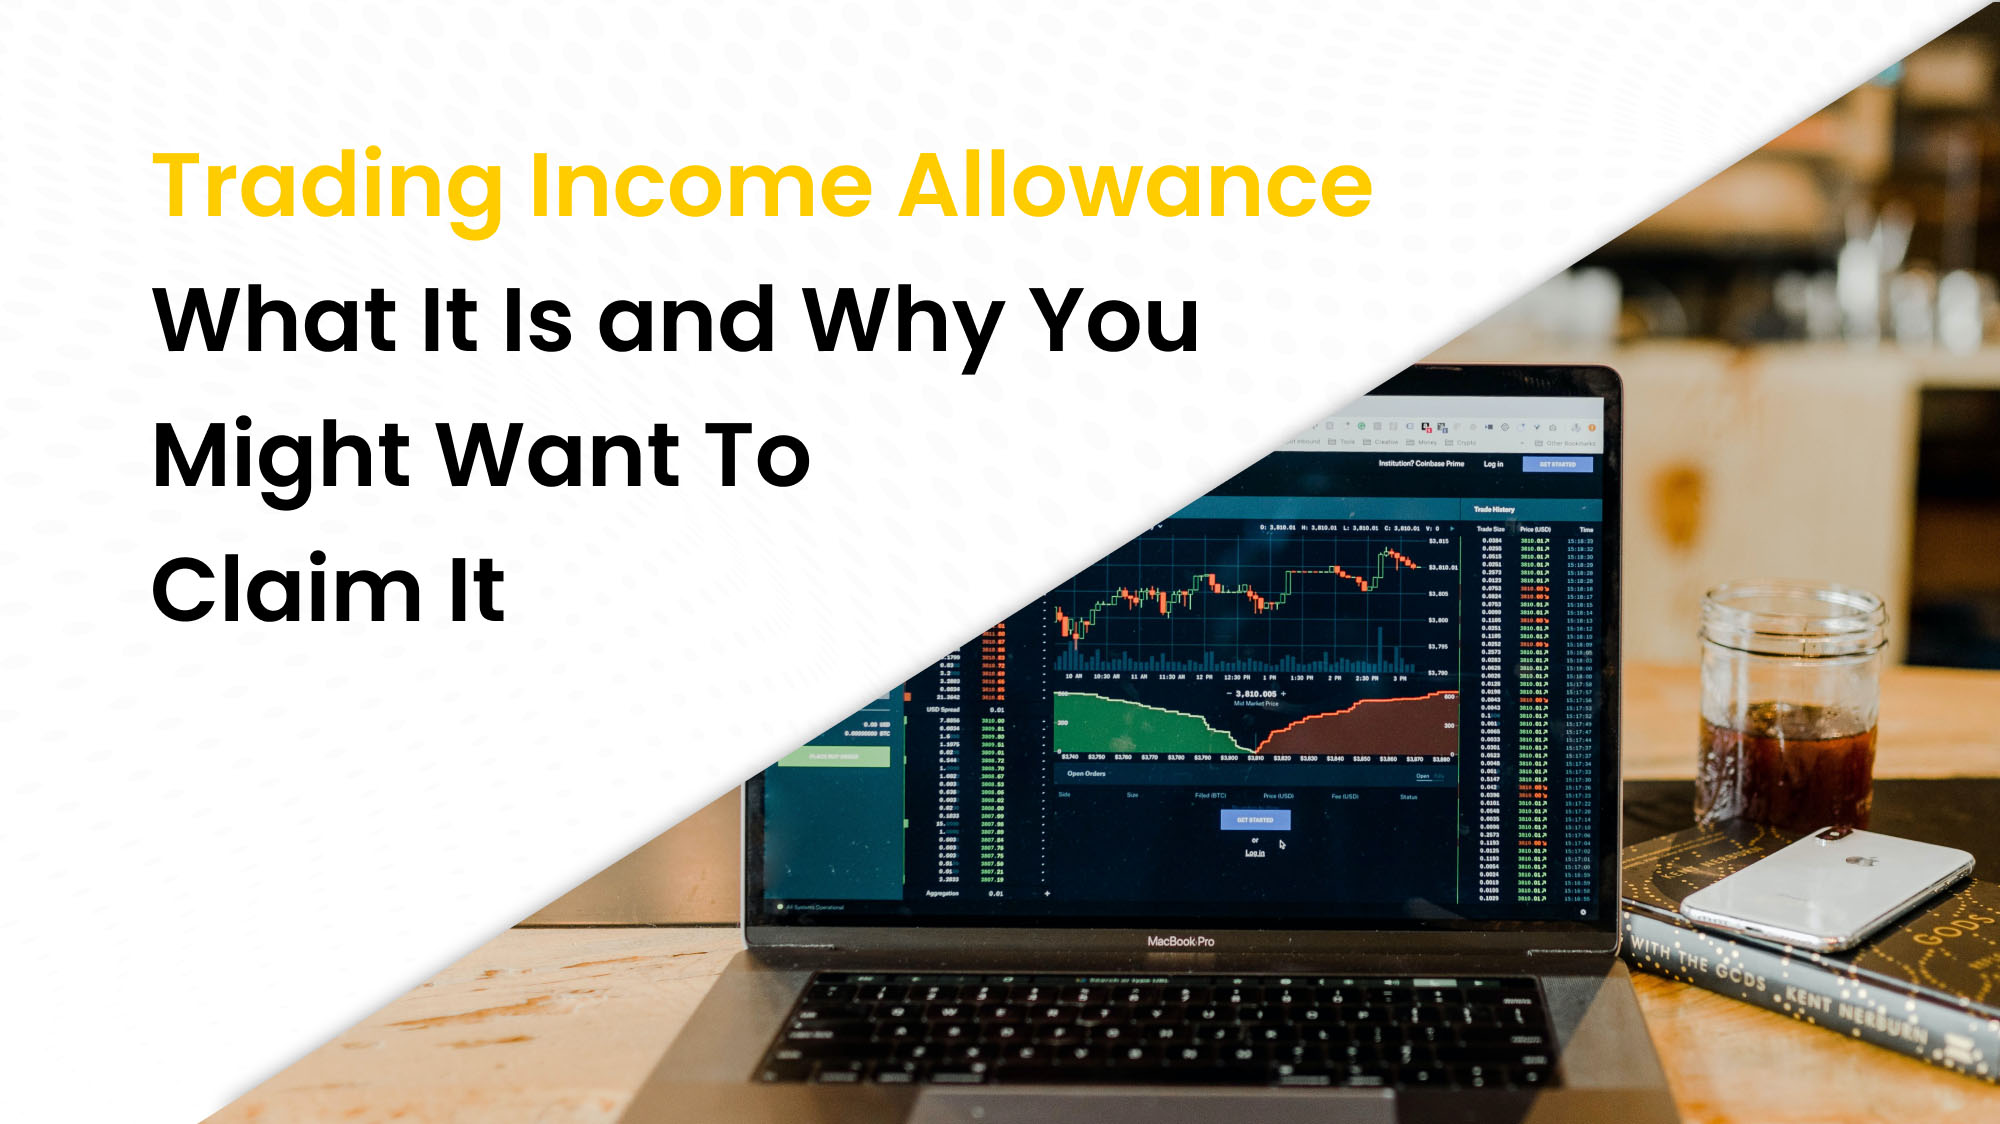 Trading Income Allowance